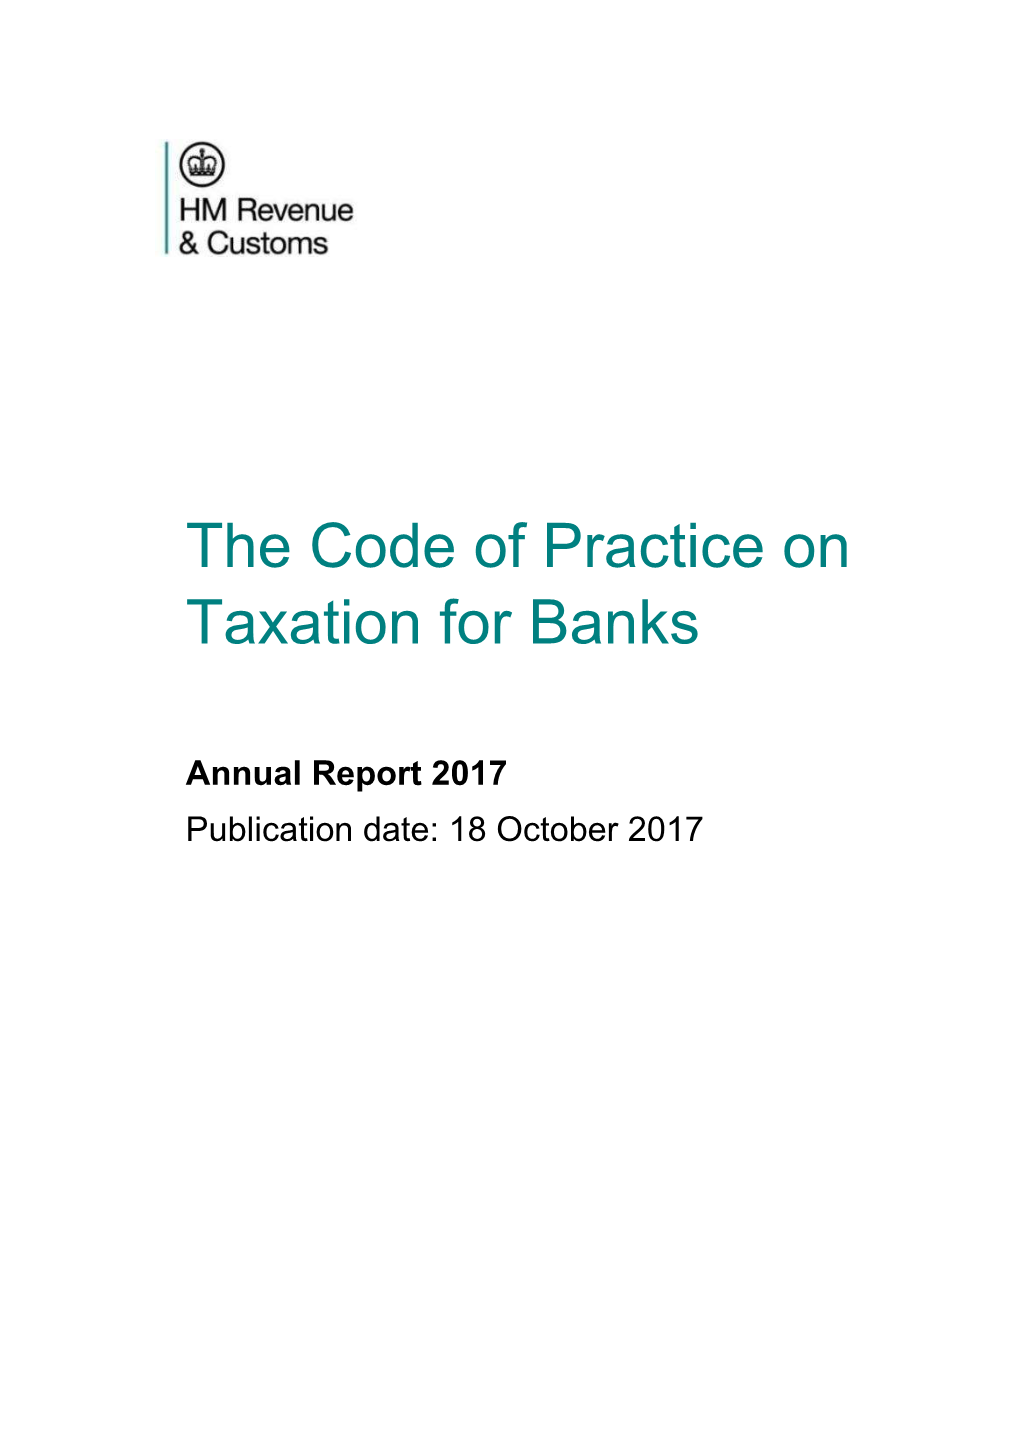 The Code of Practice on Taxation for Banks